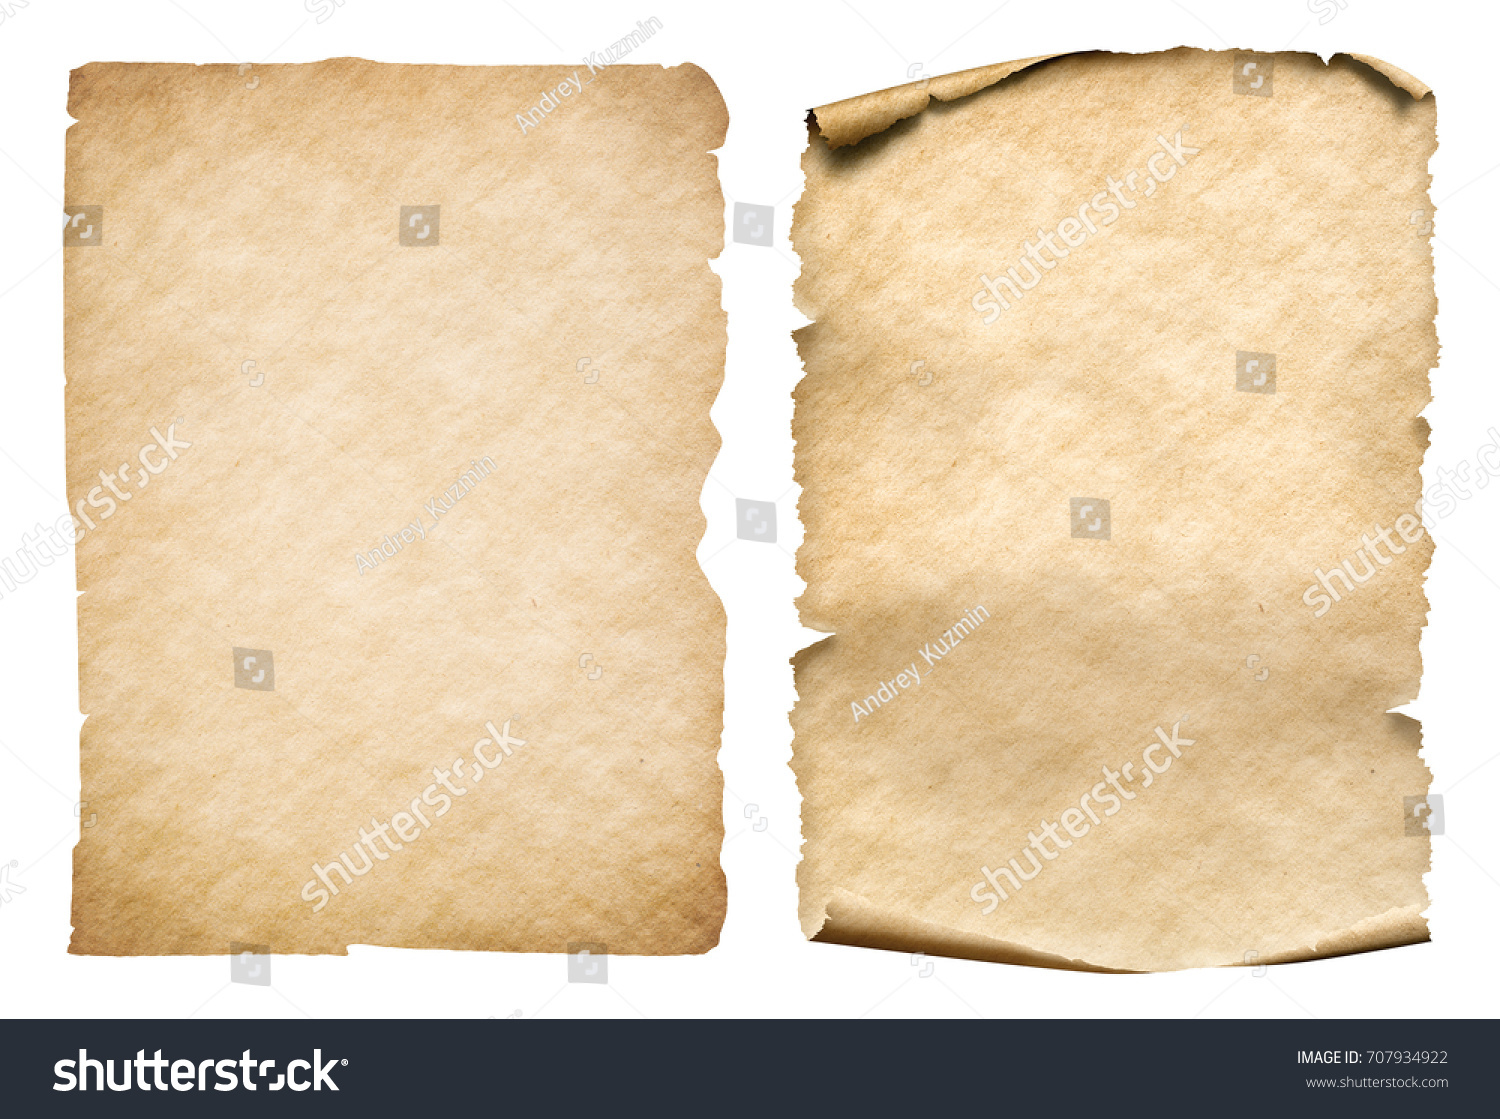 Powerpoint Template Papyrus Antique Two Old Paper Ohouklujj